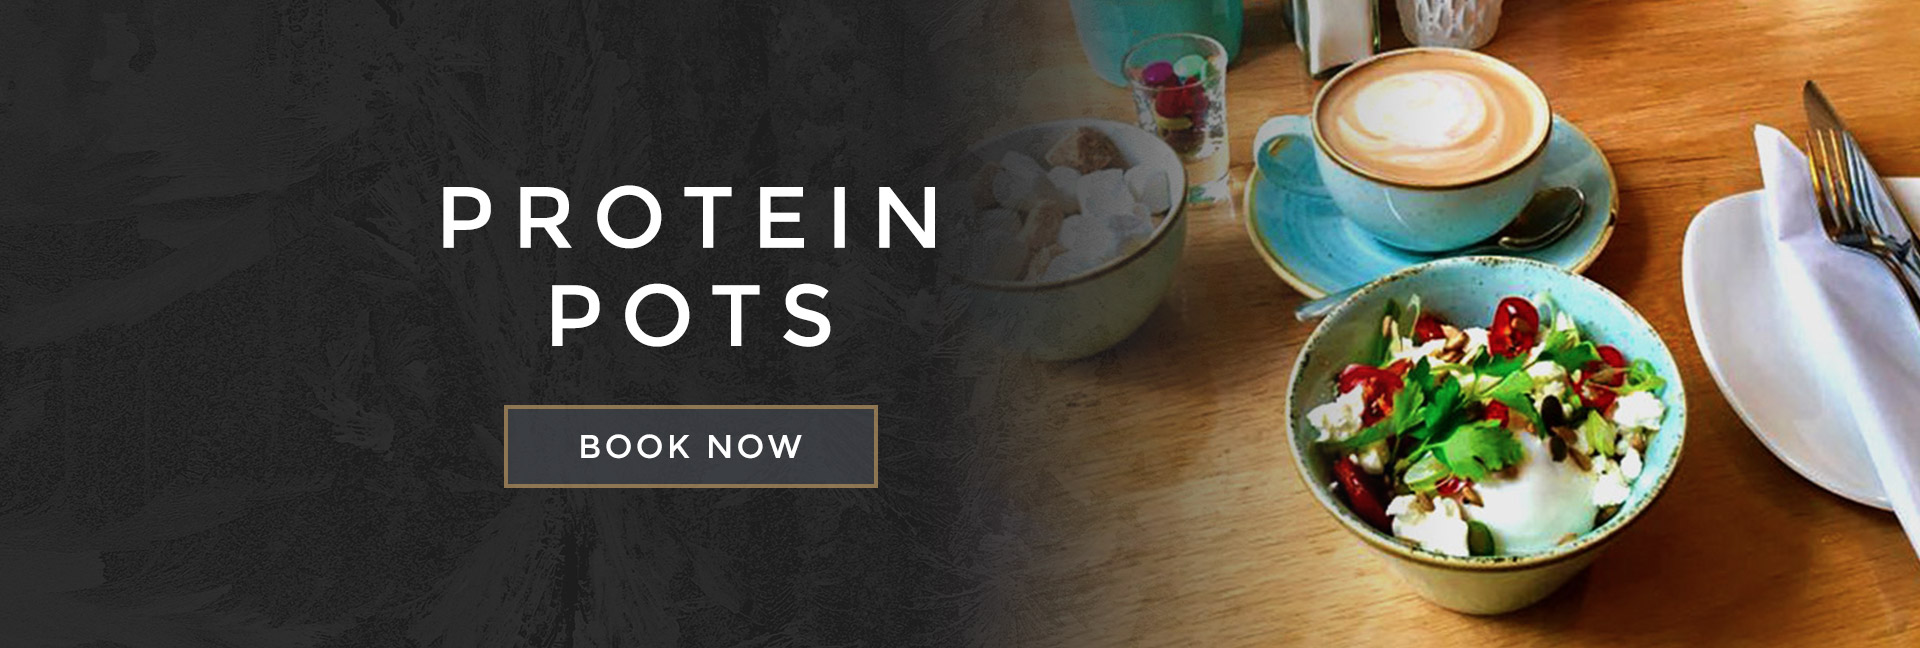 Protein pots at All Bar One Stratford Upon Avon - Book your table